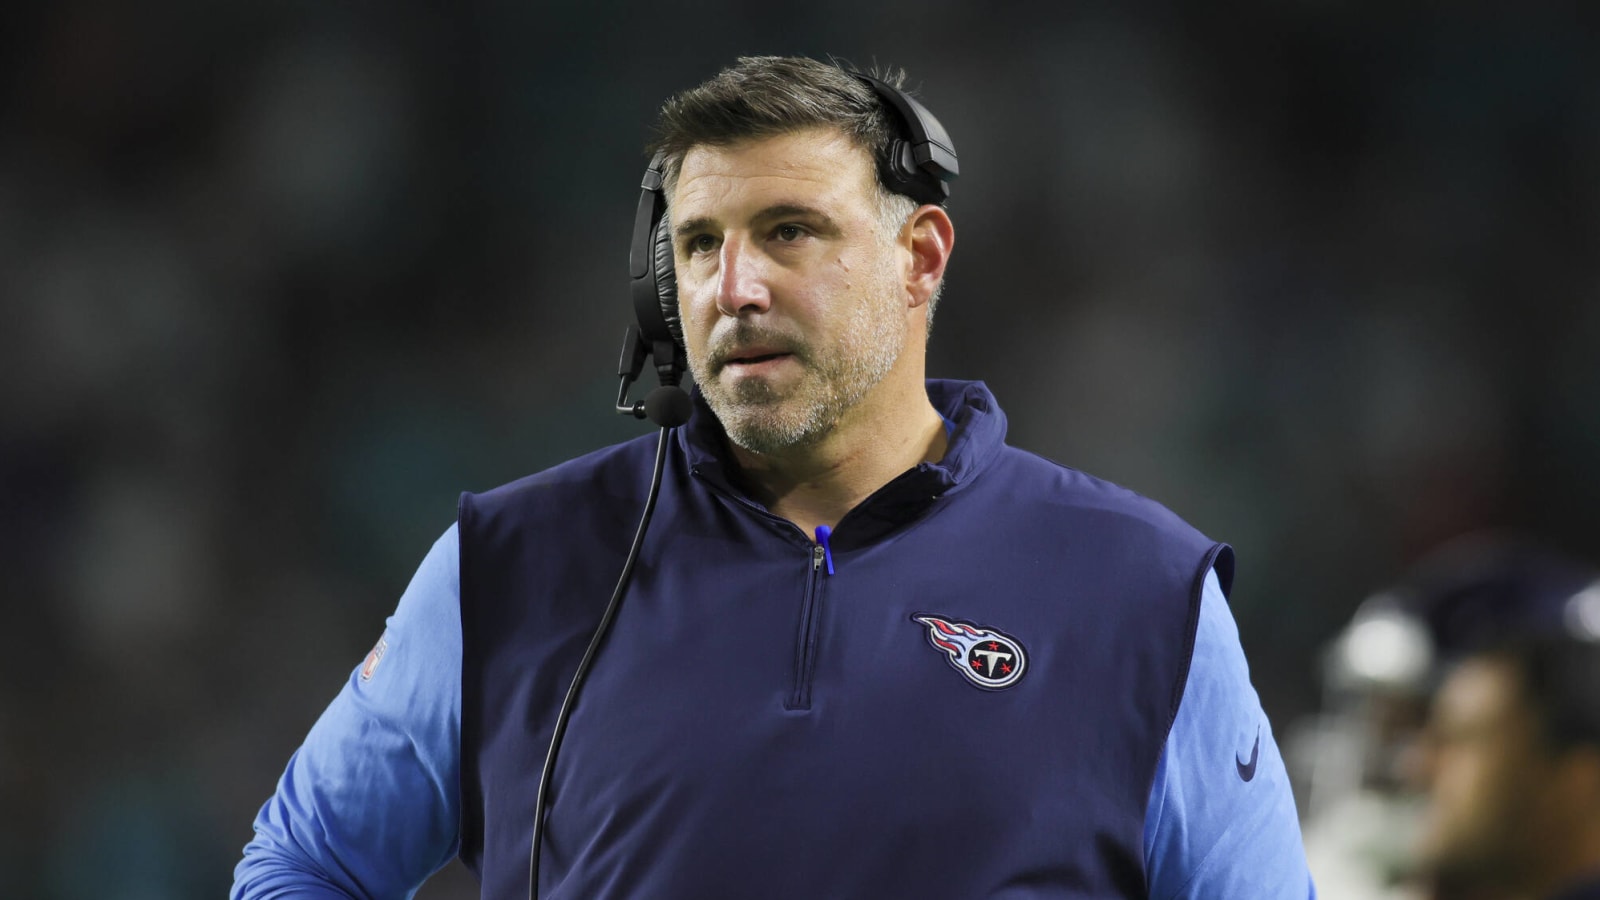 Insider discusses Titans' Mike Vrabel possibly replacing Patriots' Bill Belichick